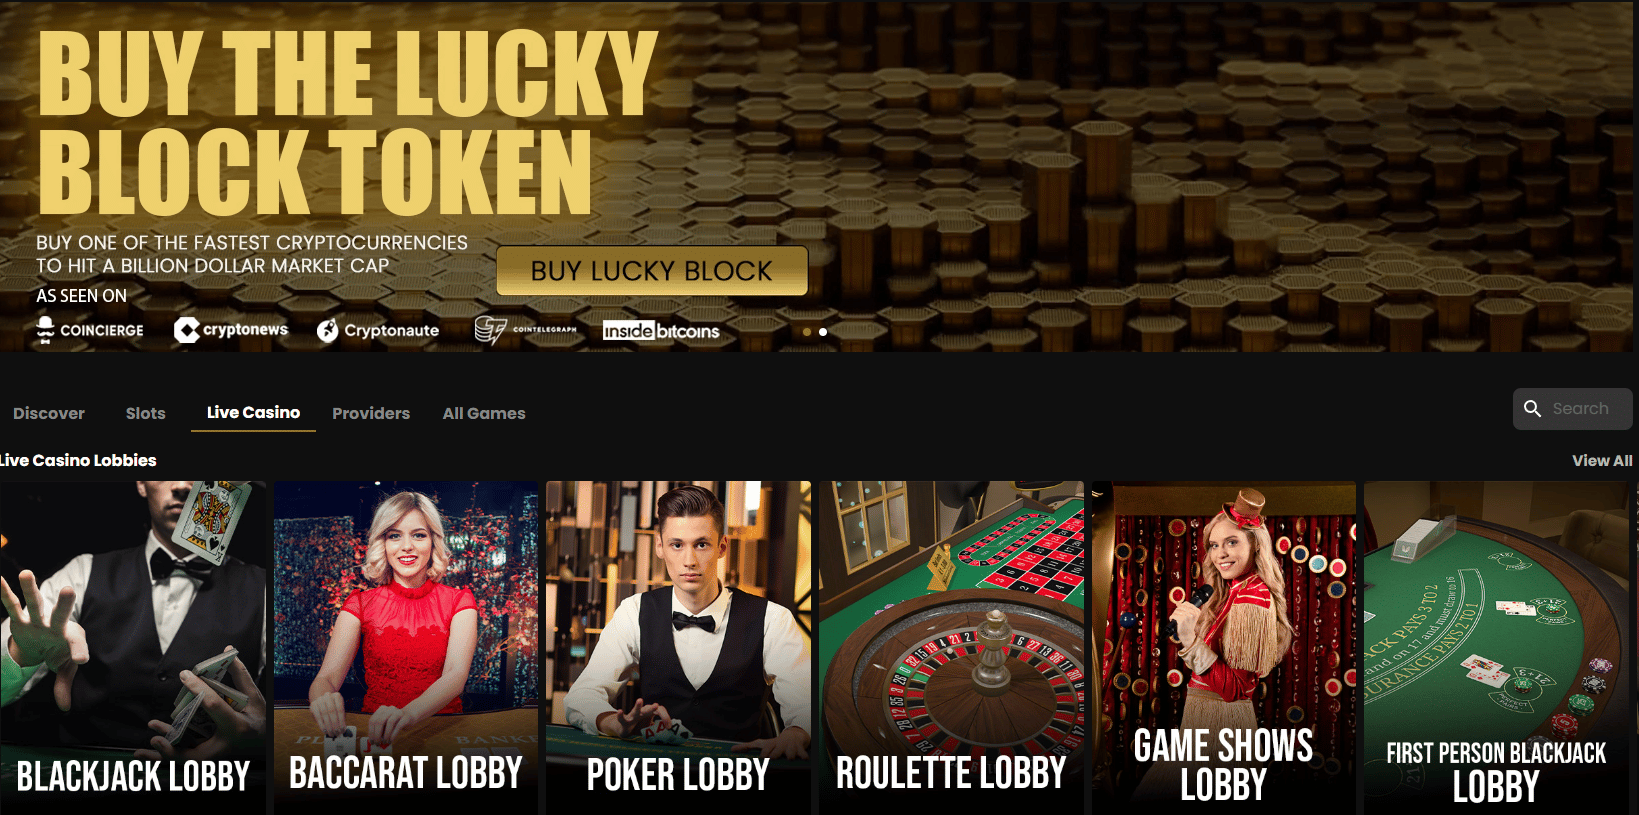 Blog with information on casino - authoritative article